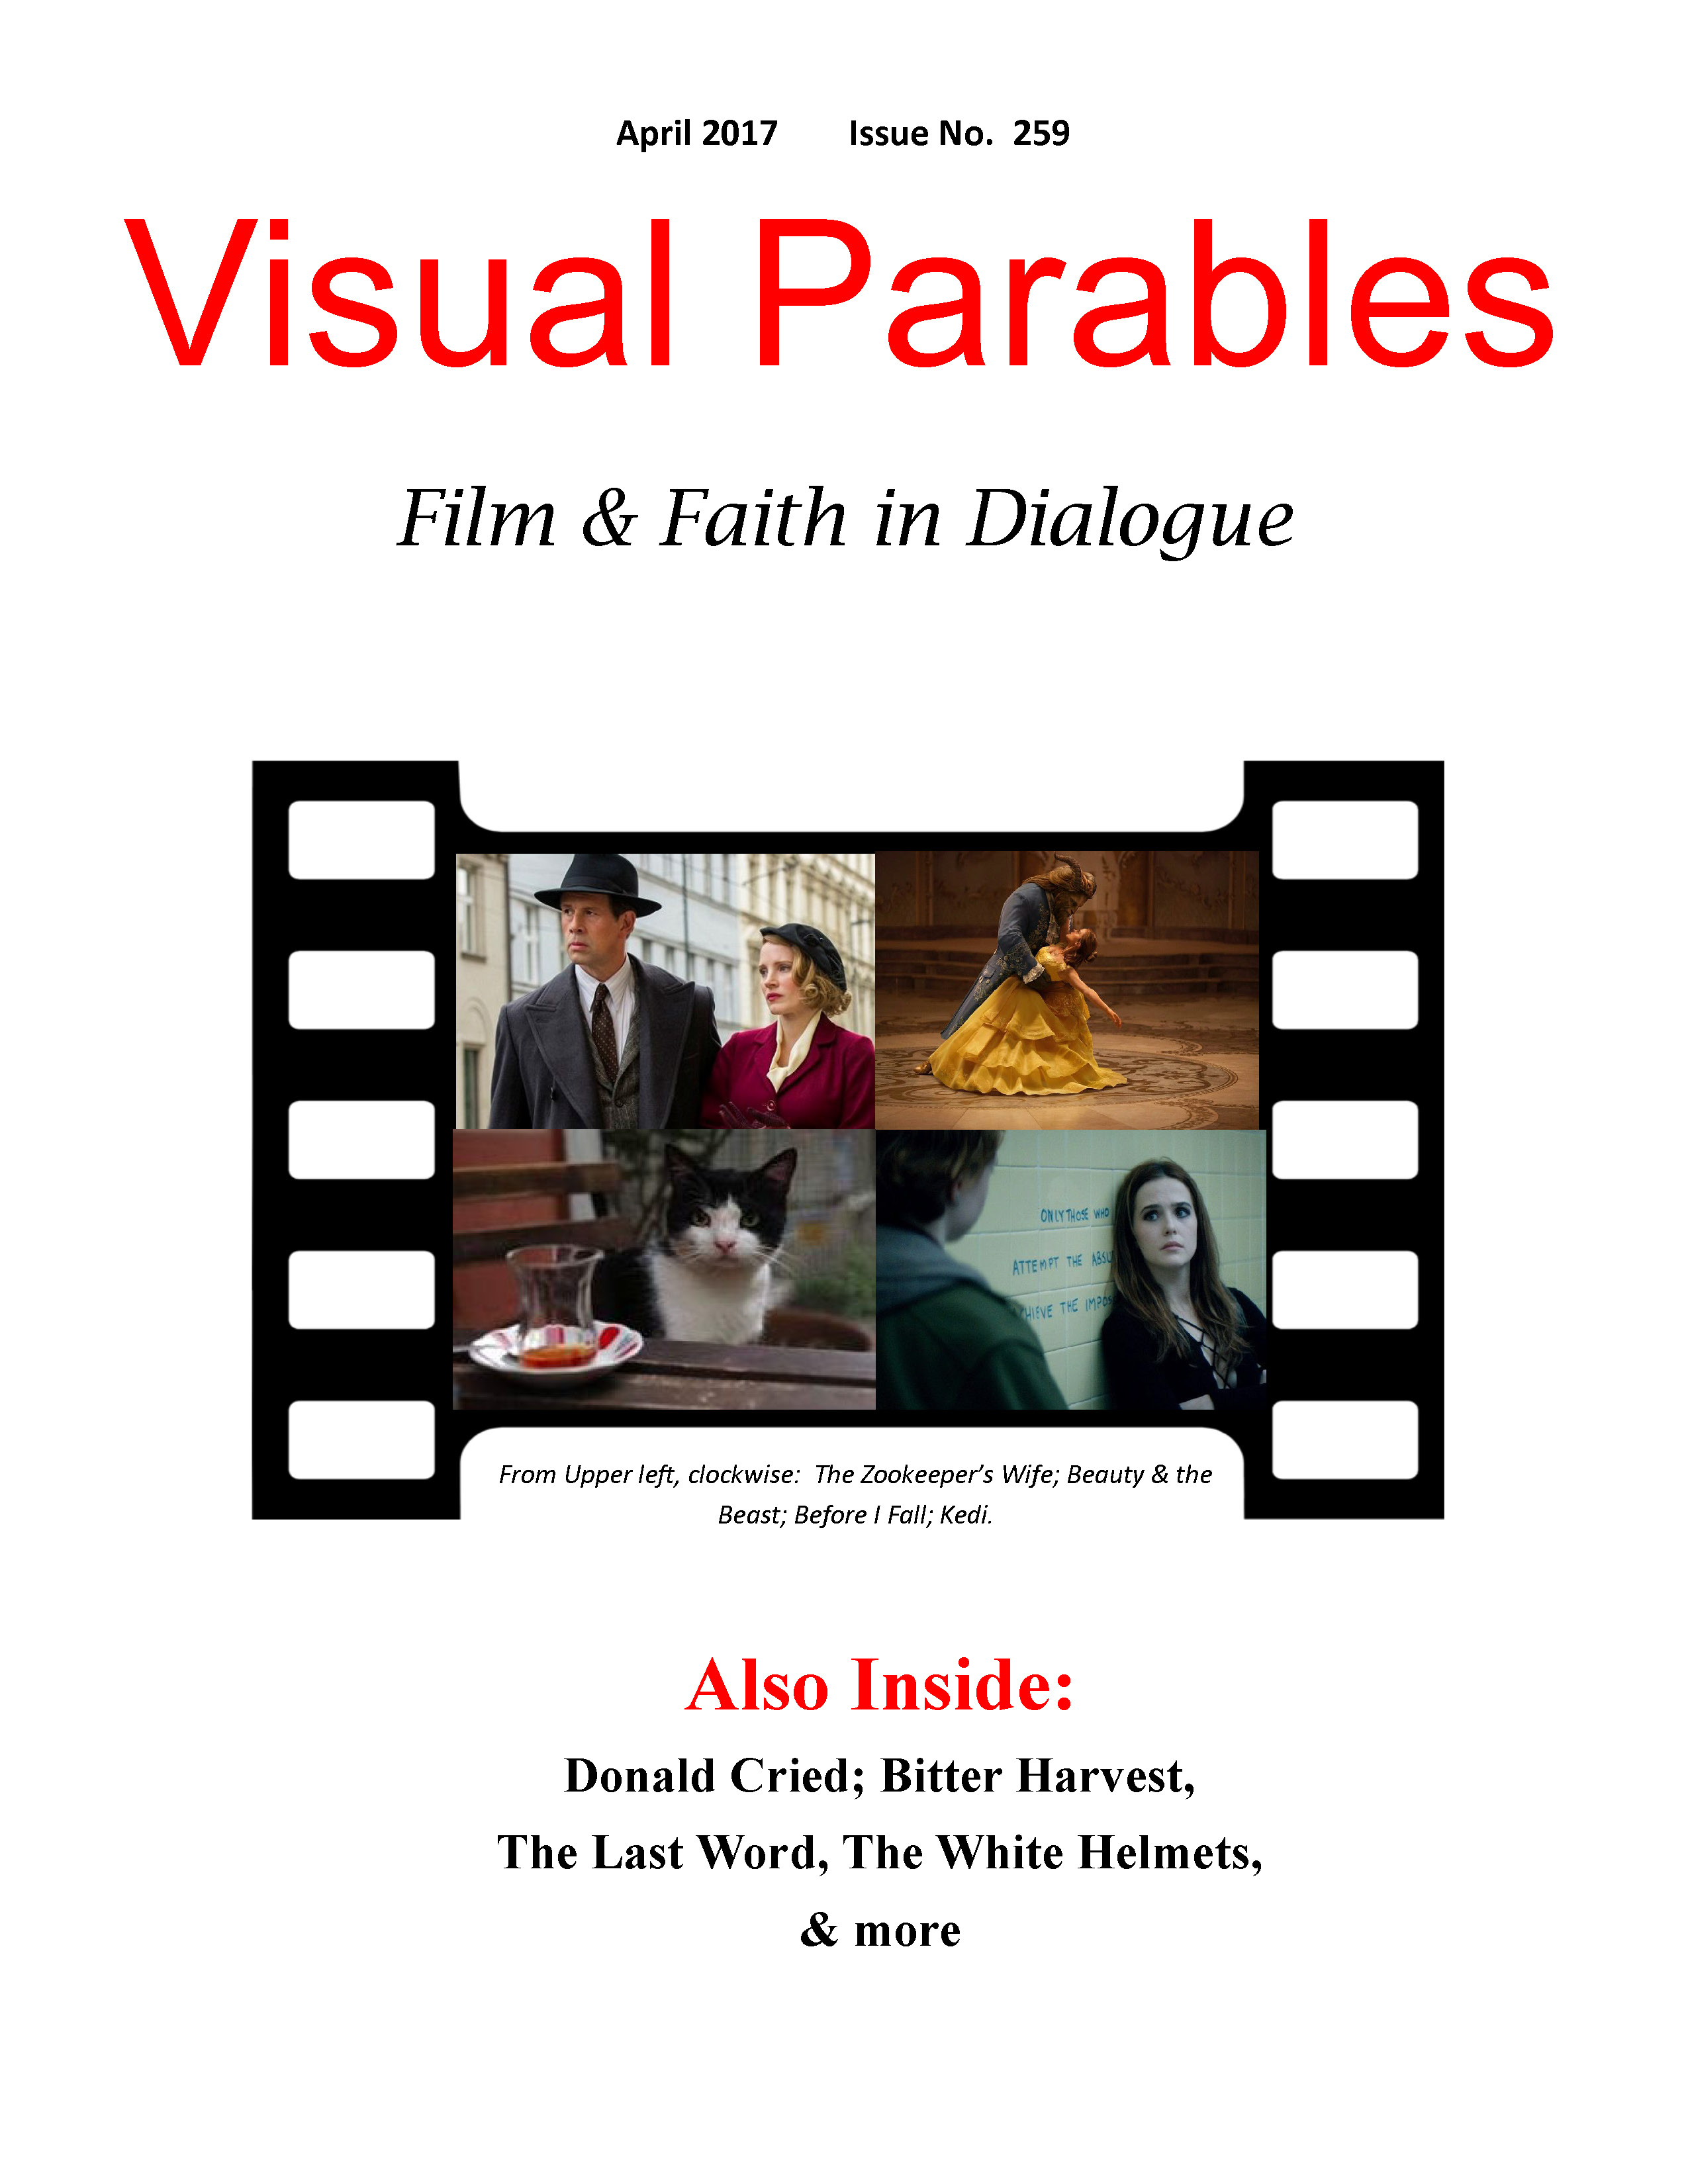 April 2017 issue of Visual Parables